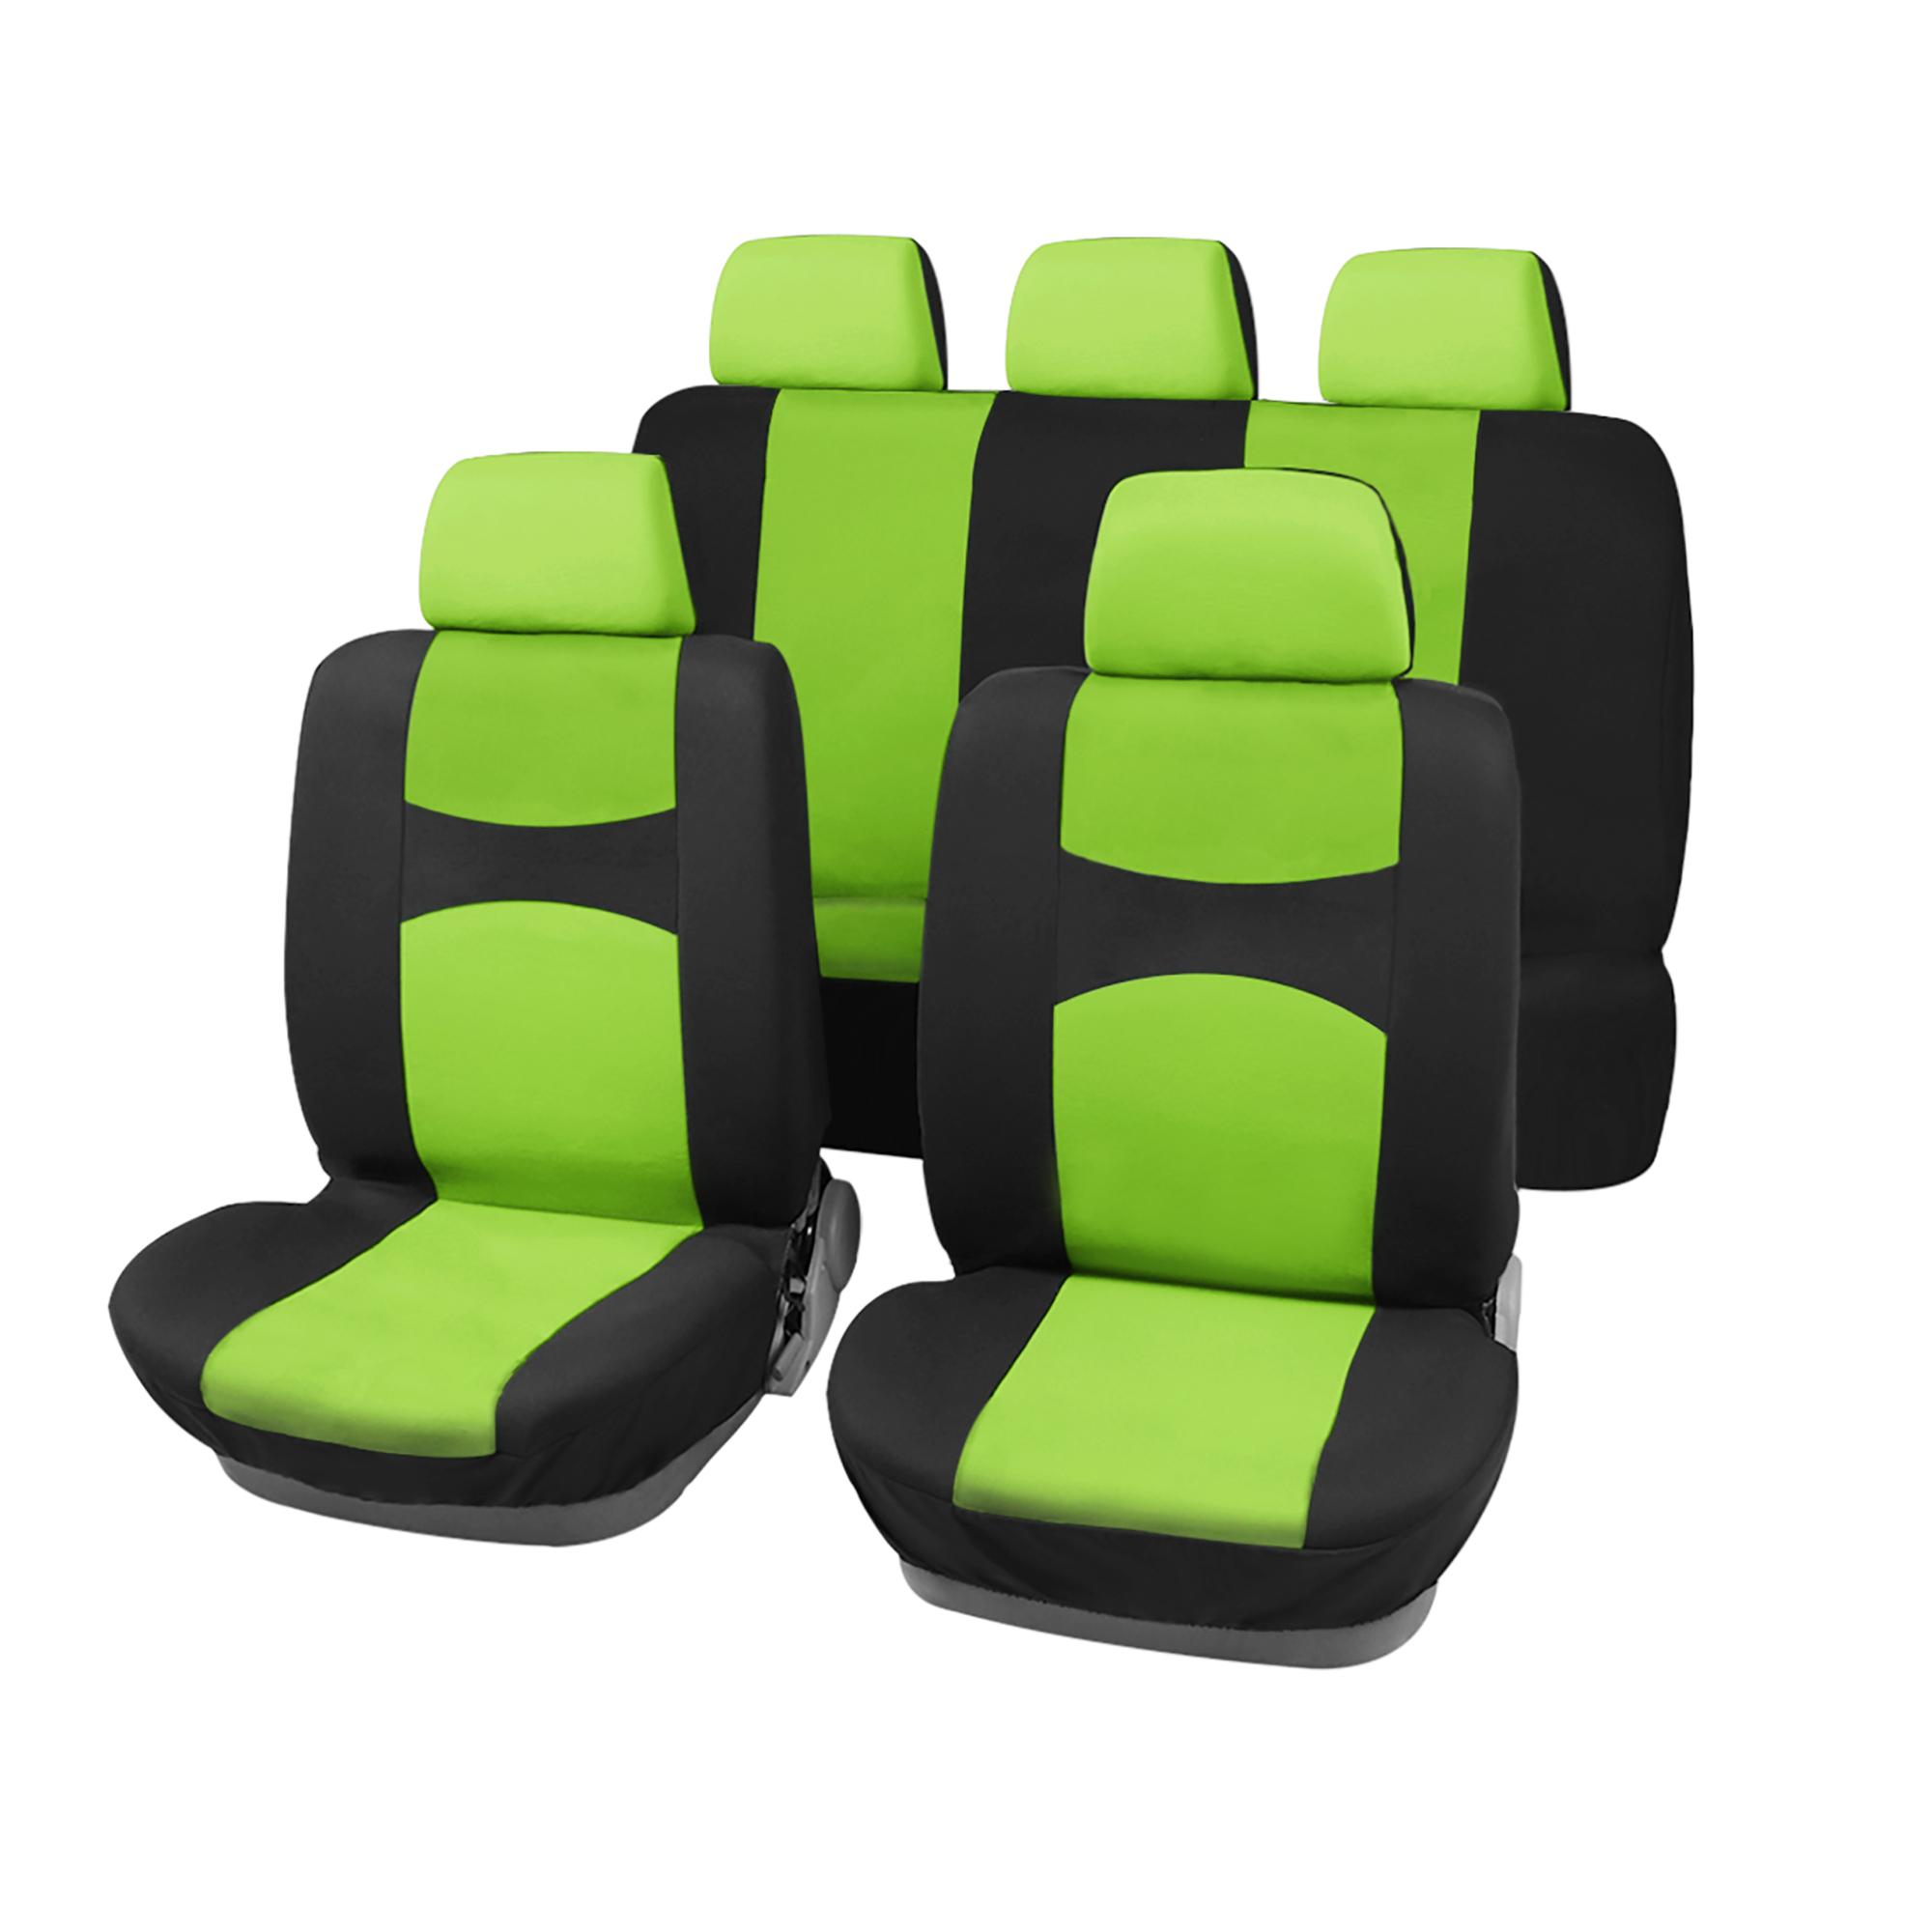 Unique Bargains Universal Fit Full Set Car Seat Cover Kit Seat Protector Pad for SUV Black Green